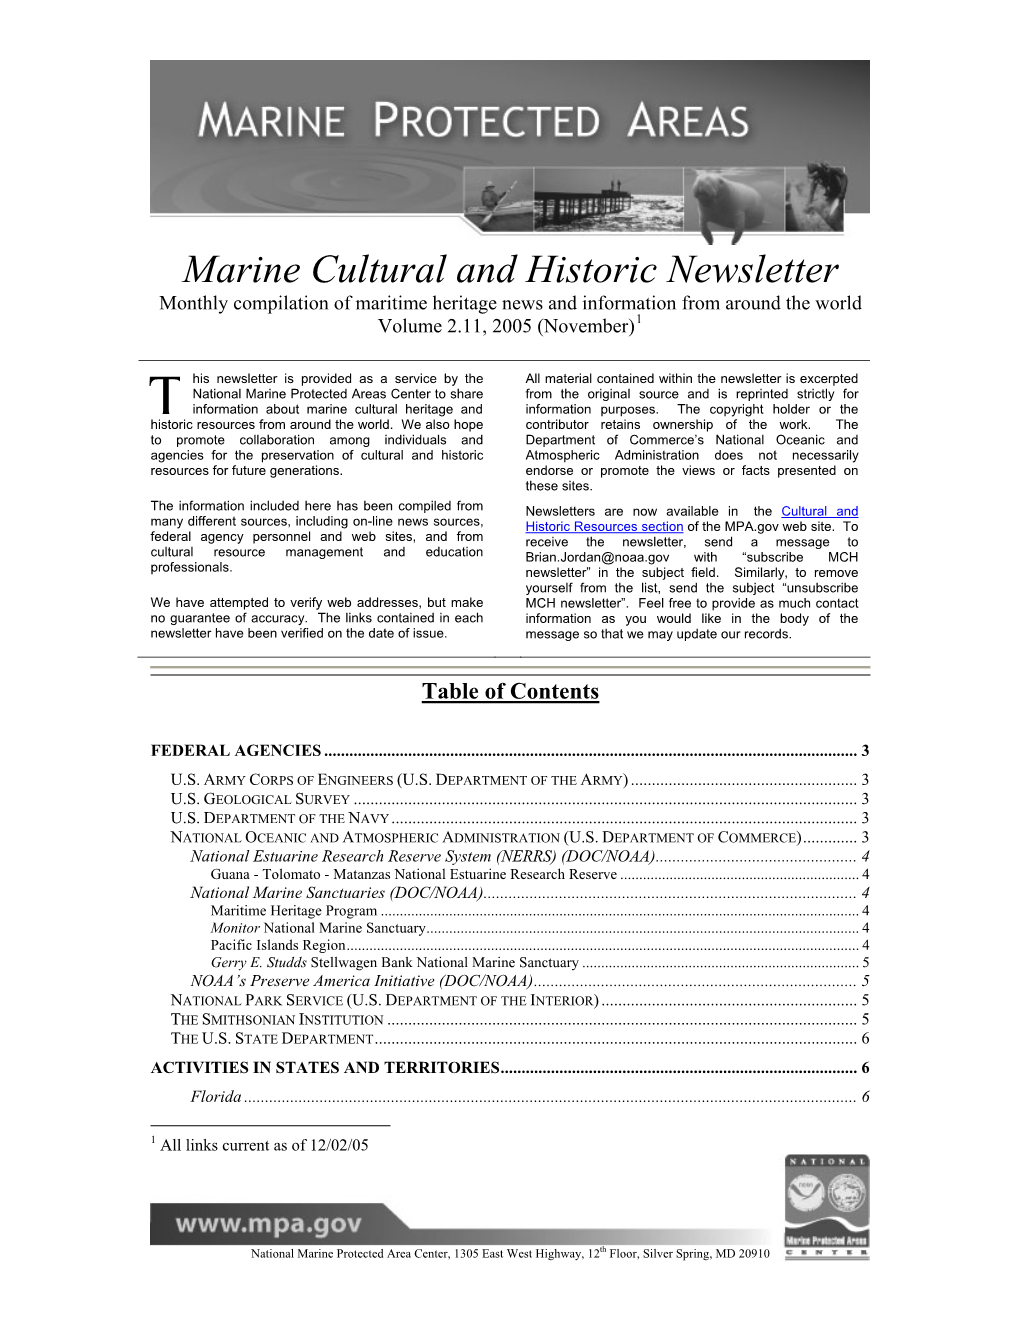 Marine Cultural and Historic Newsletter Vol 2(11)